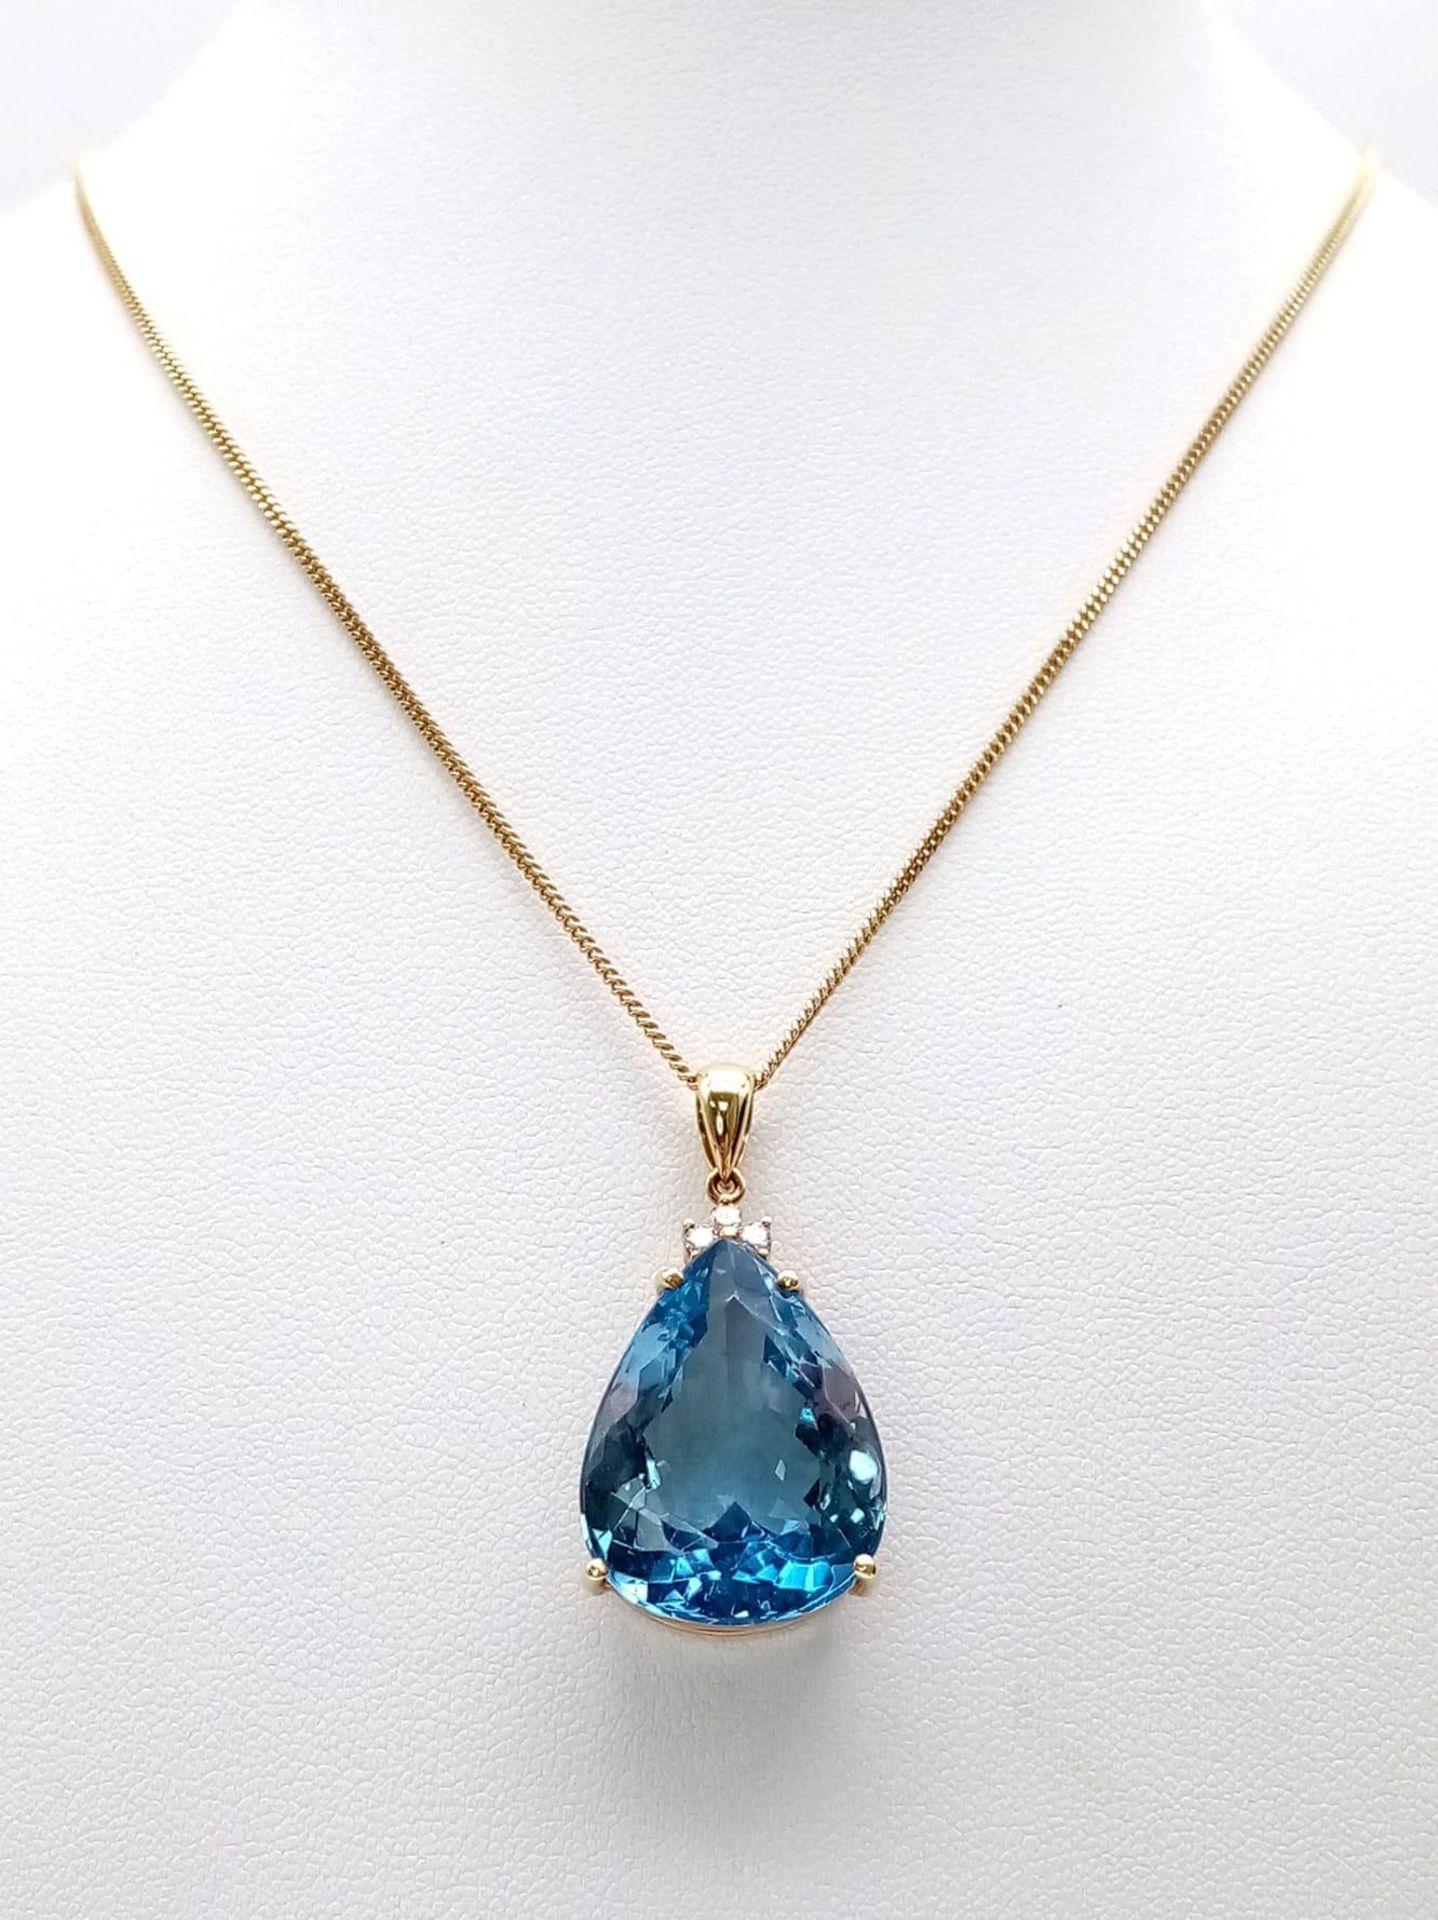 A Captivating 29ct Brazilian Blue Topaz, Diamond and 18K Gold Pendant - On an 18K Yellow Gold - Image 5 of 13